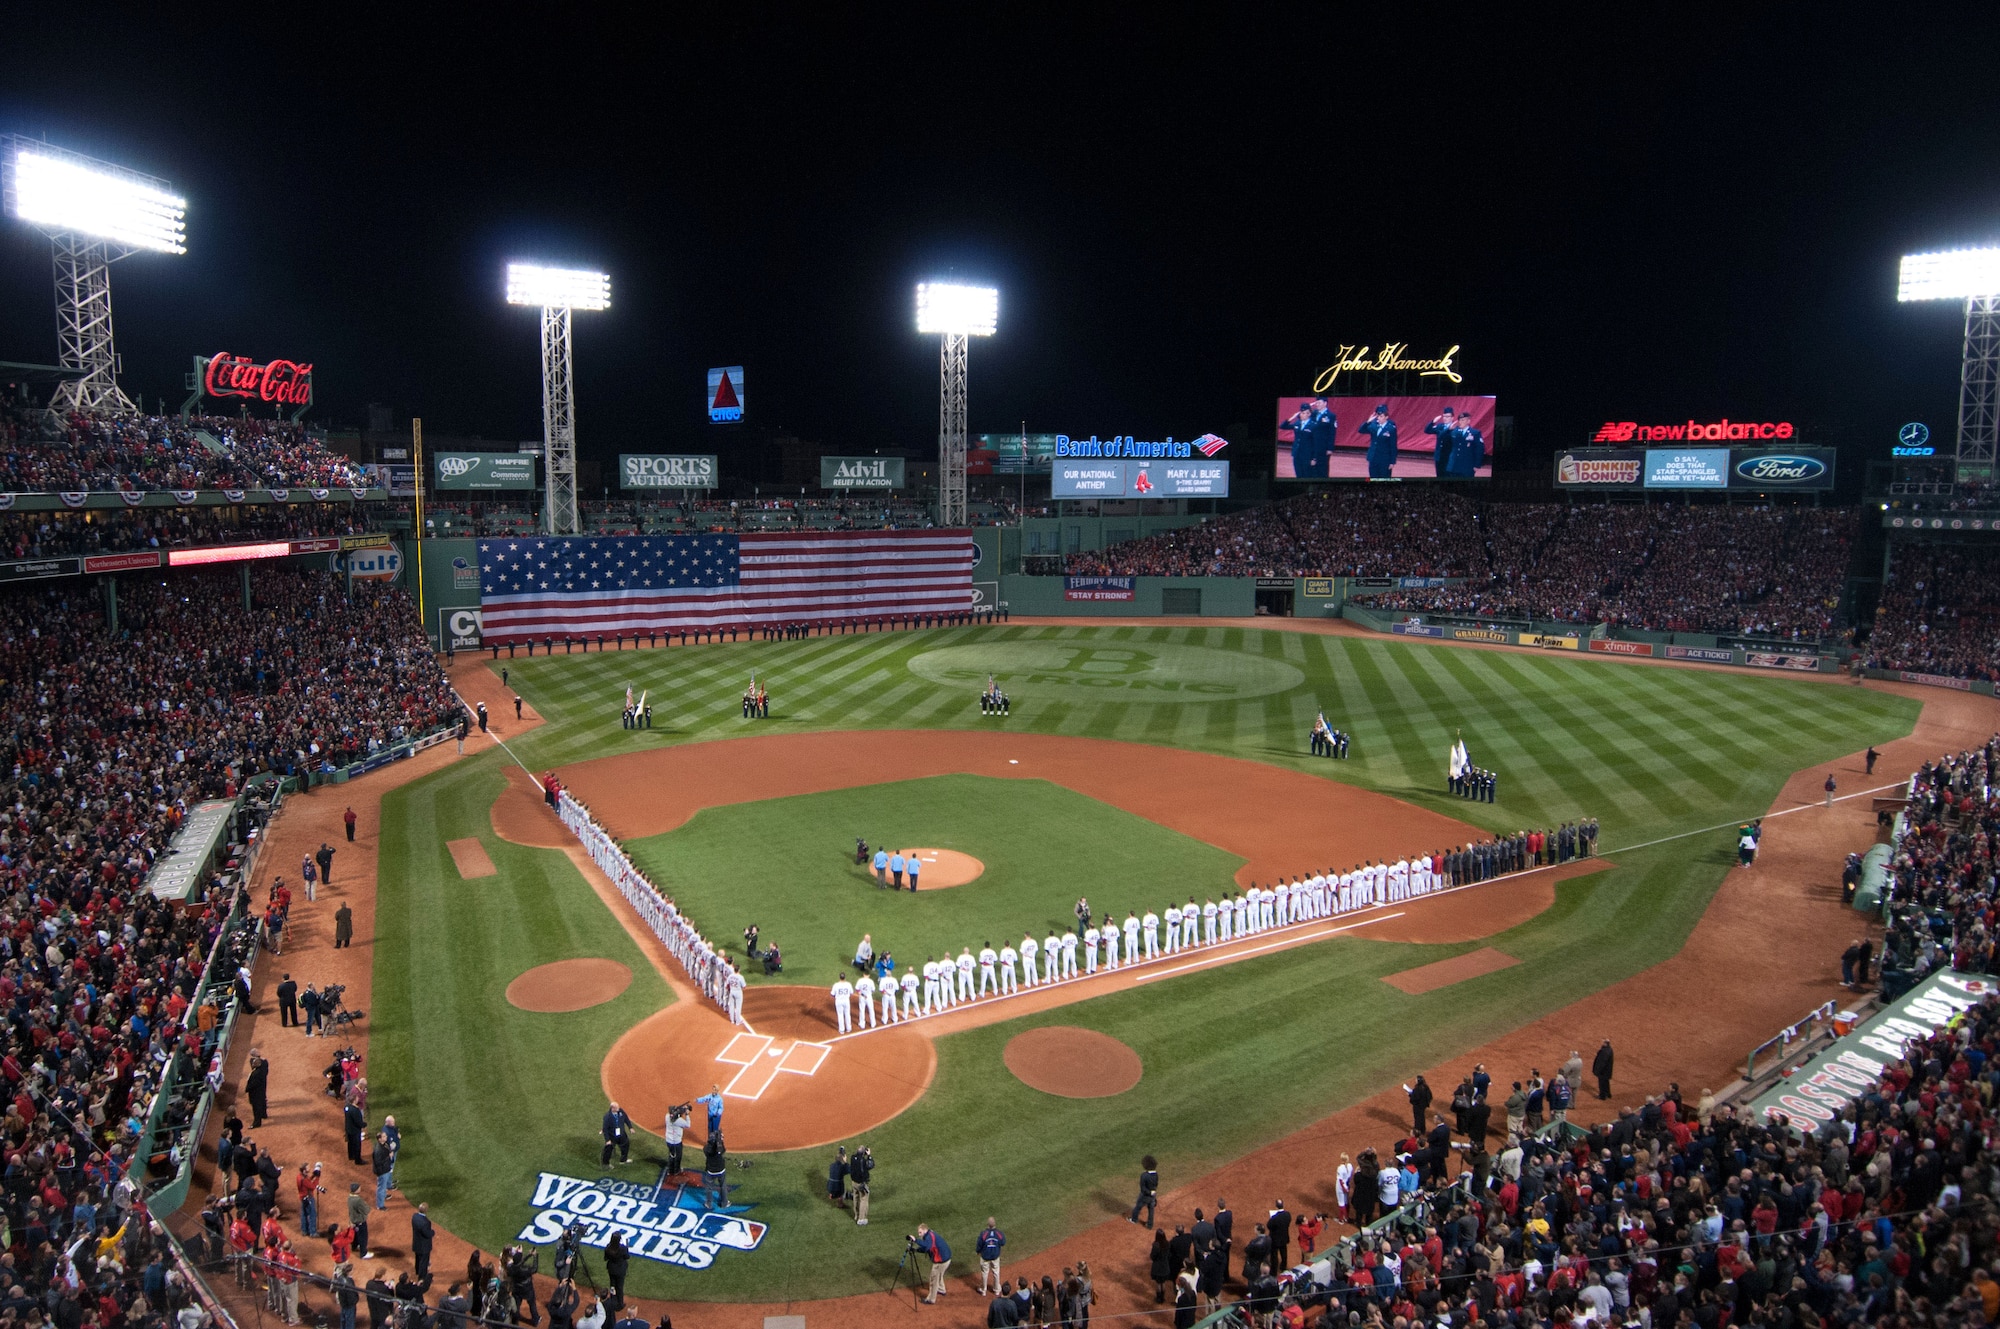 Airmen from Hanscom Air Force Base, also captured on the centerfield Jumbotron, line the flag-draped left field wall Oct. 23, 2013, at Fenway Park in Boston during the World Series opening game . Hanscom Airmen also provided one of the four military color guard formations on the field and other support to this major sporting event. 